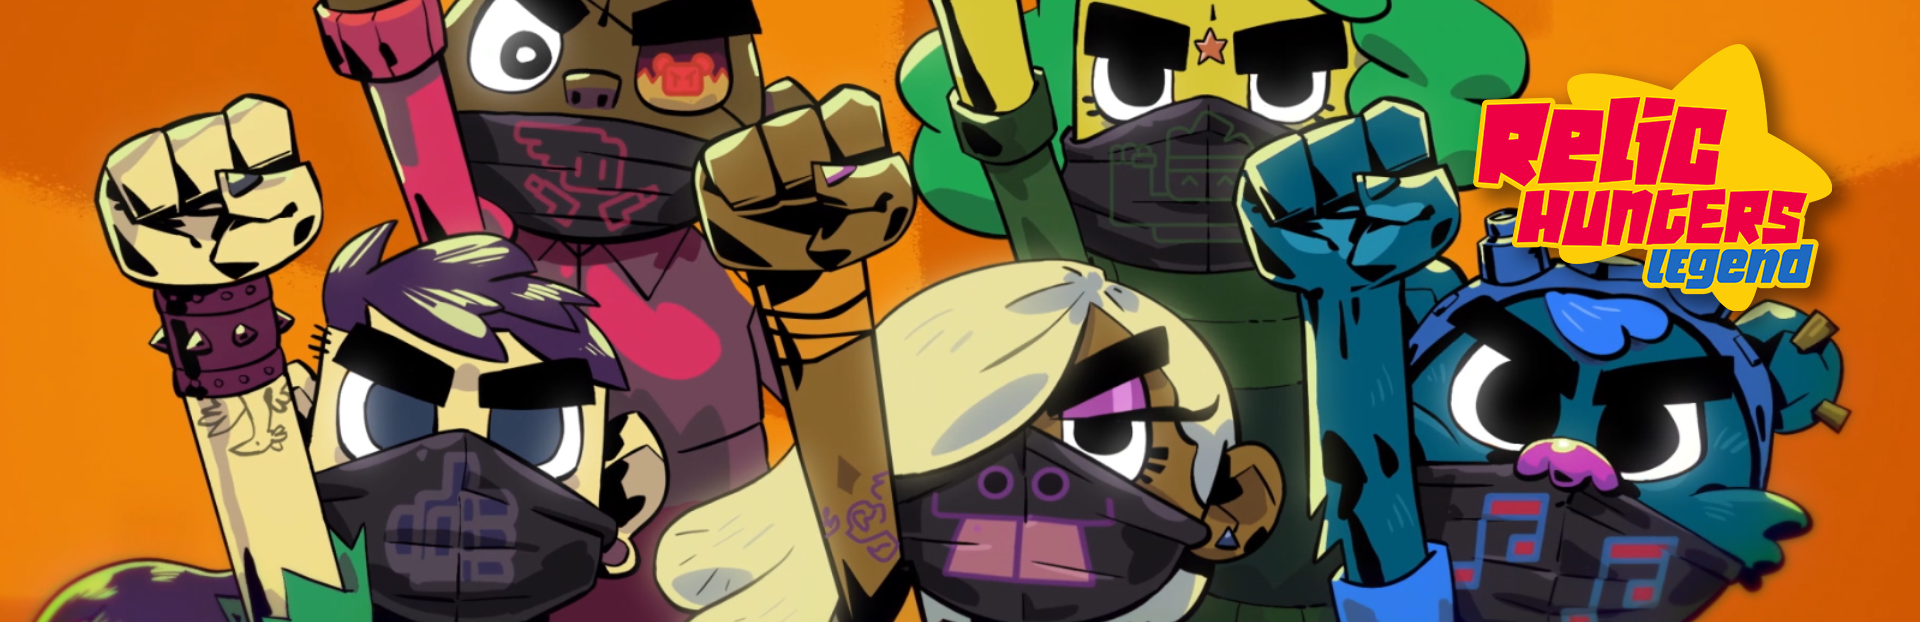 Rogue Snail on how launching Relic Hunters: Rebels on Netflix